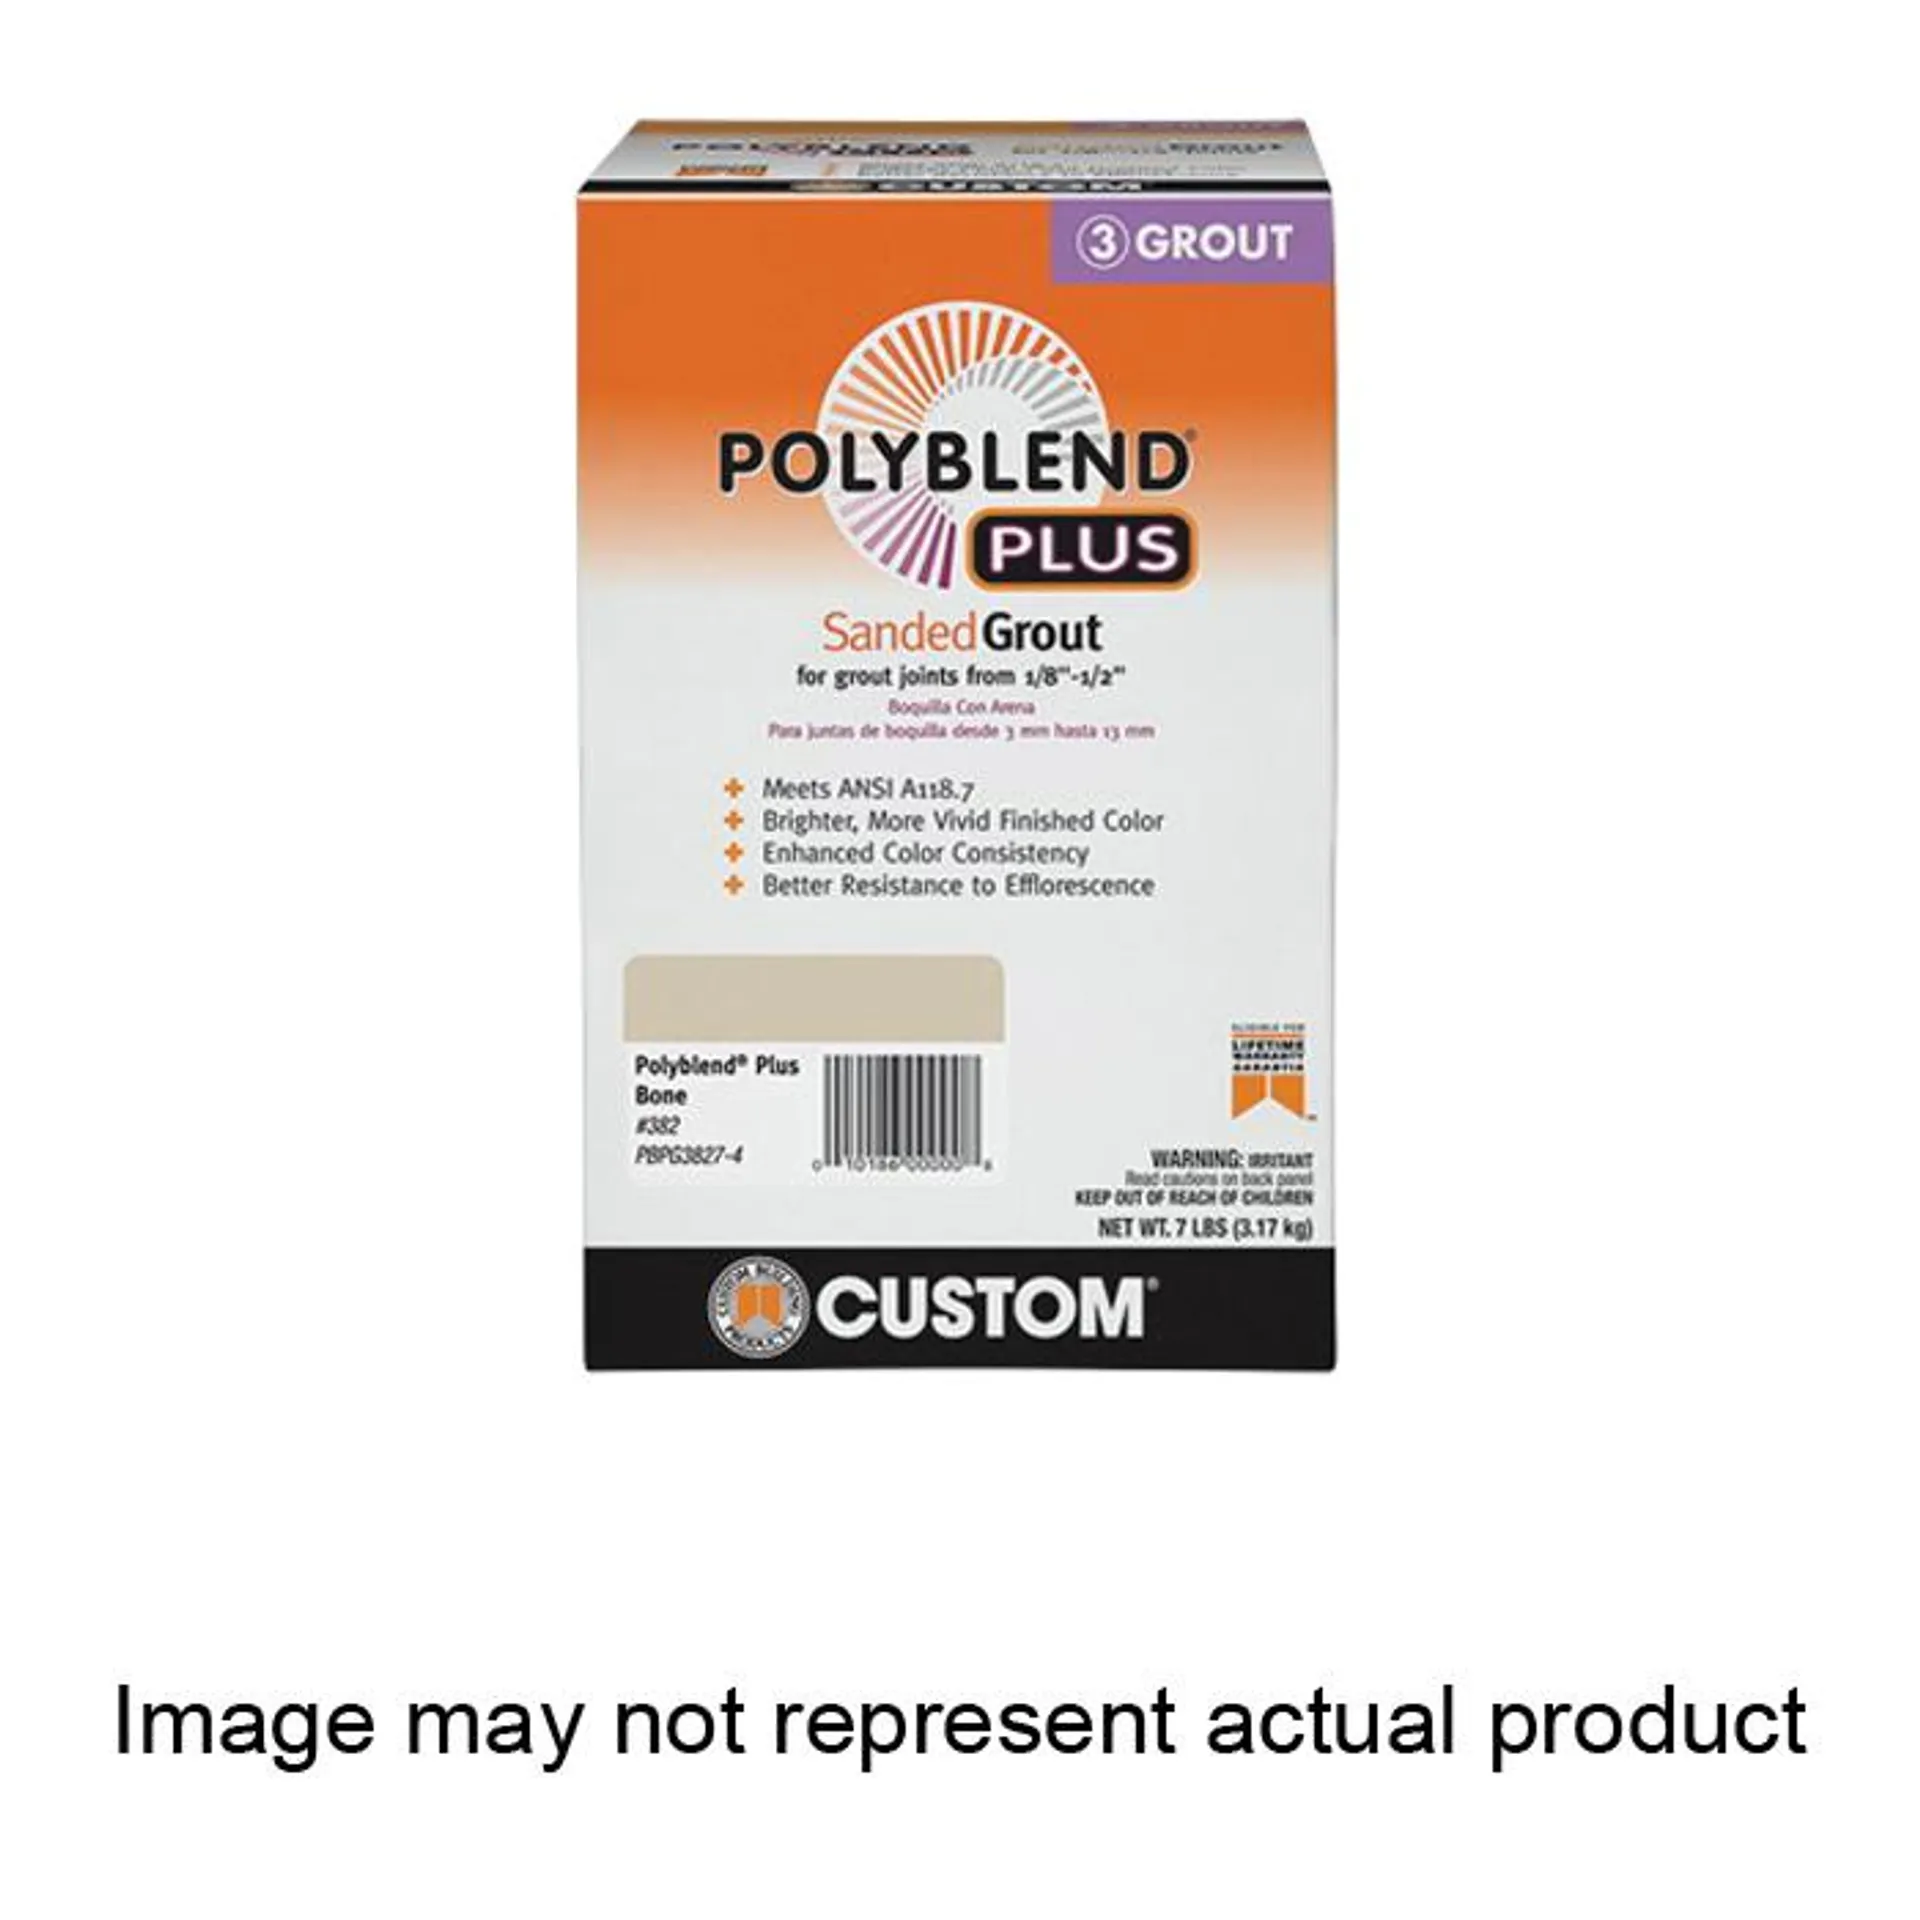 Polyblend Plus PBBG097-4 Sanded Grout, Solid Powder, Characteristic, Natural Gray, 7 lb Box